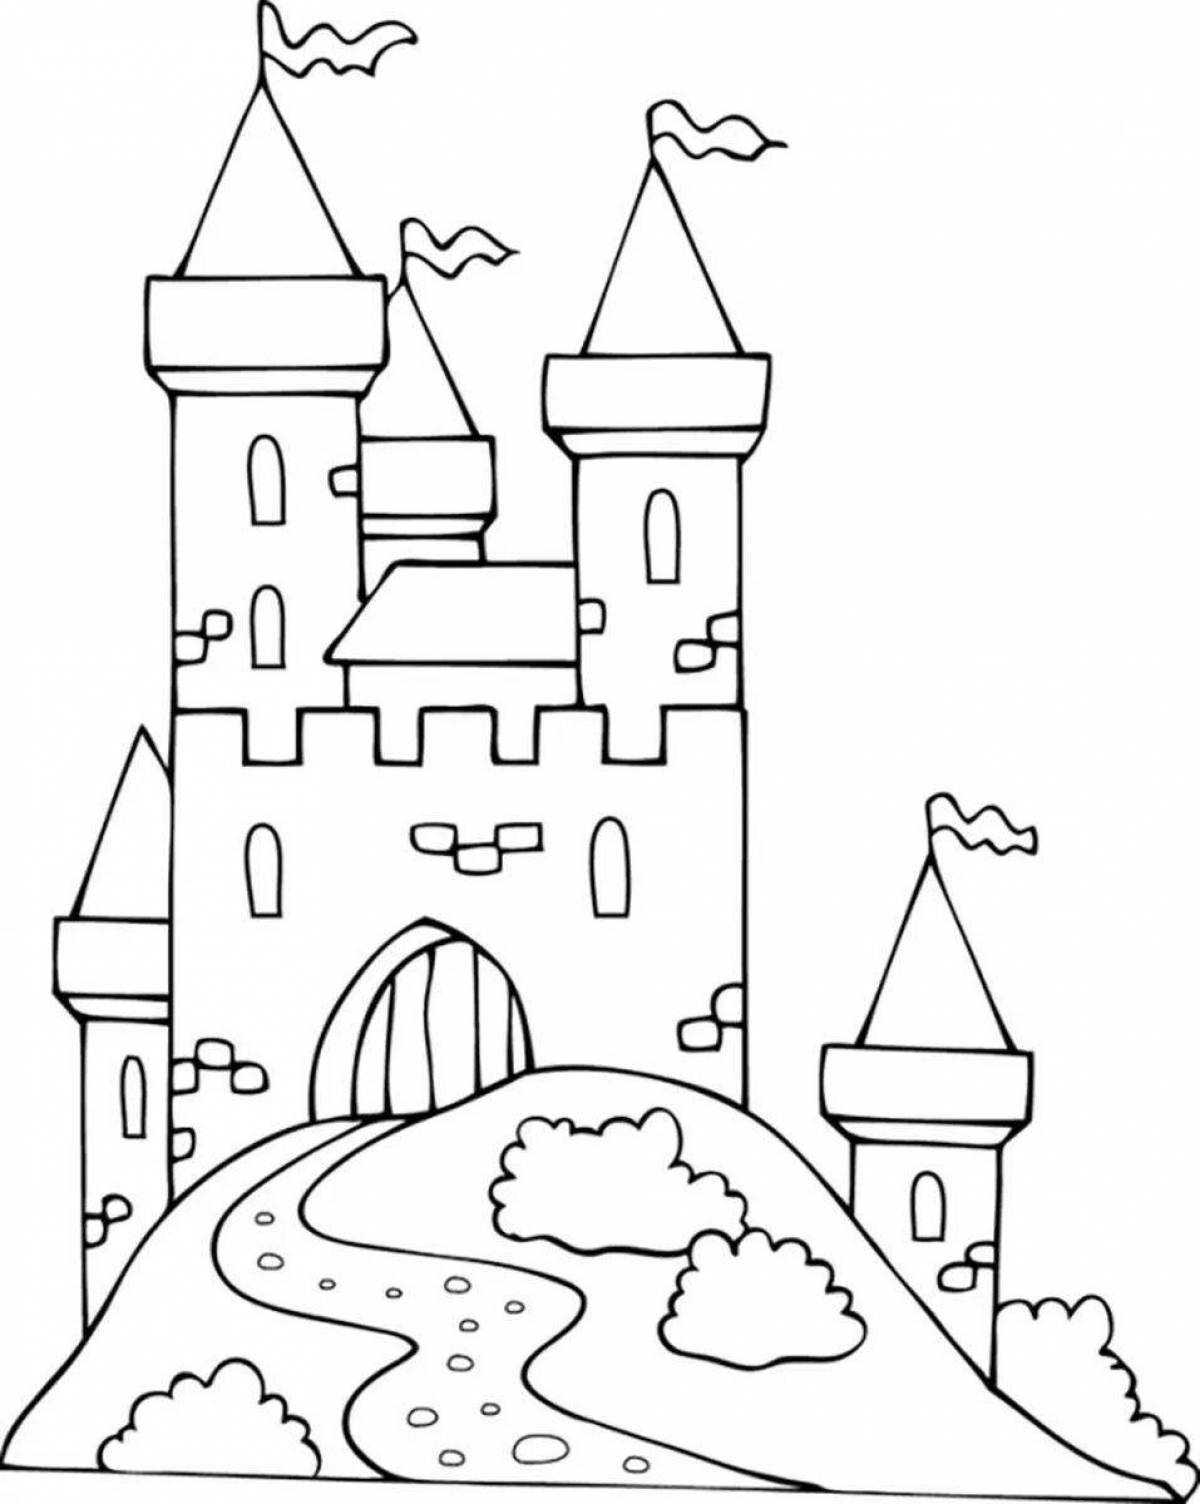 Shining fairytale kingdom coloring book for kids